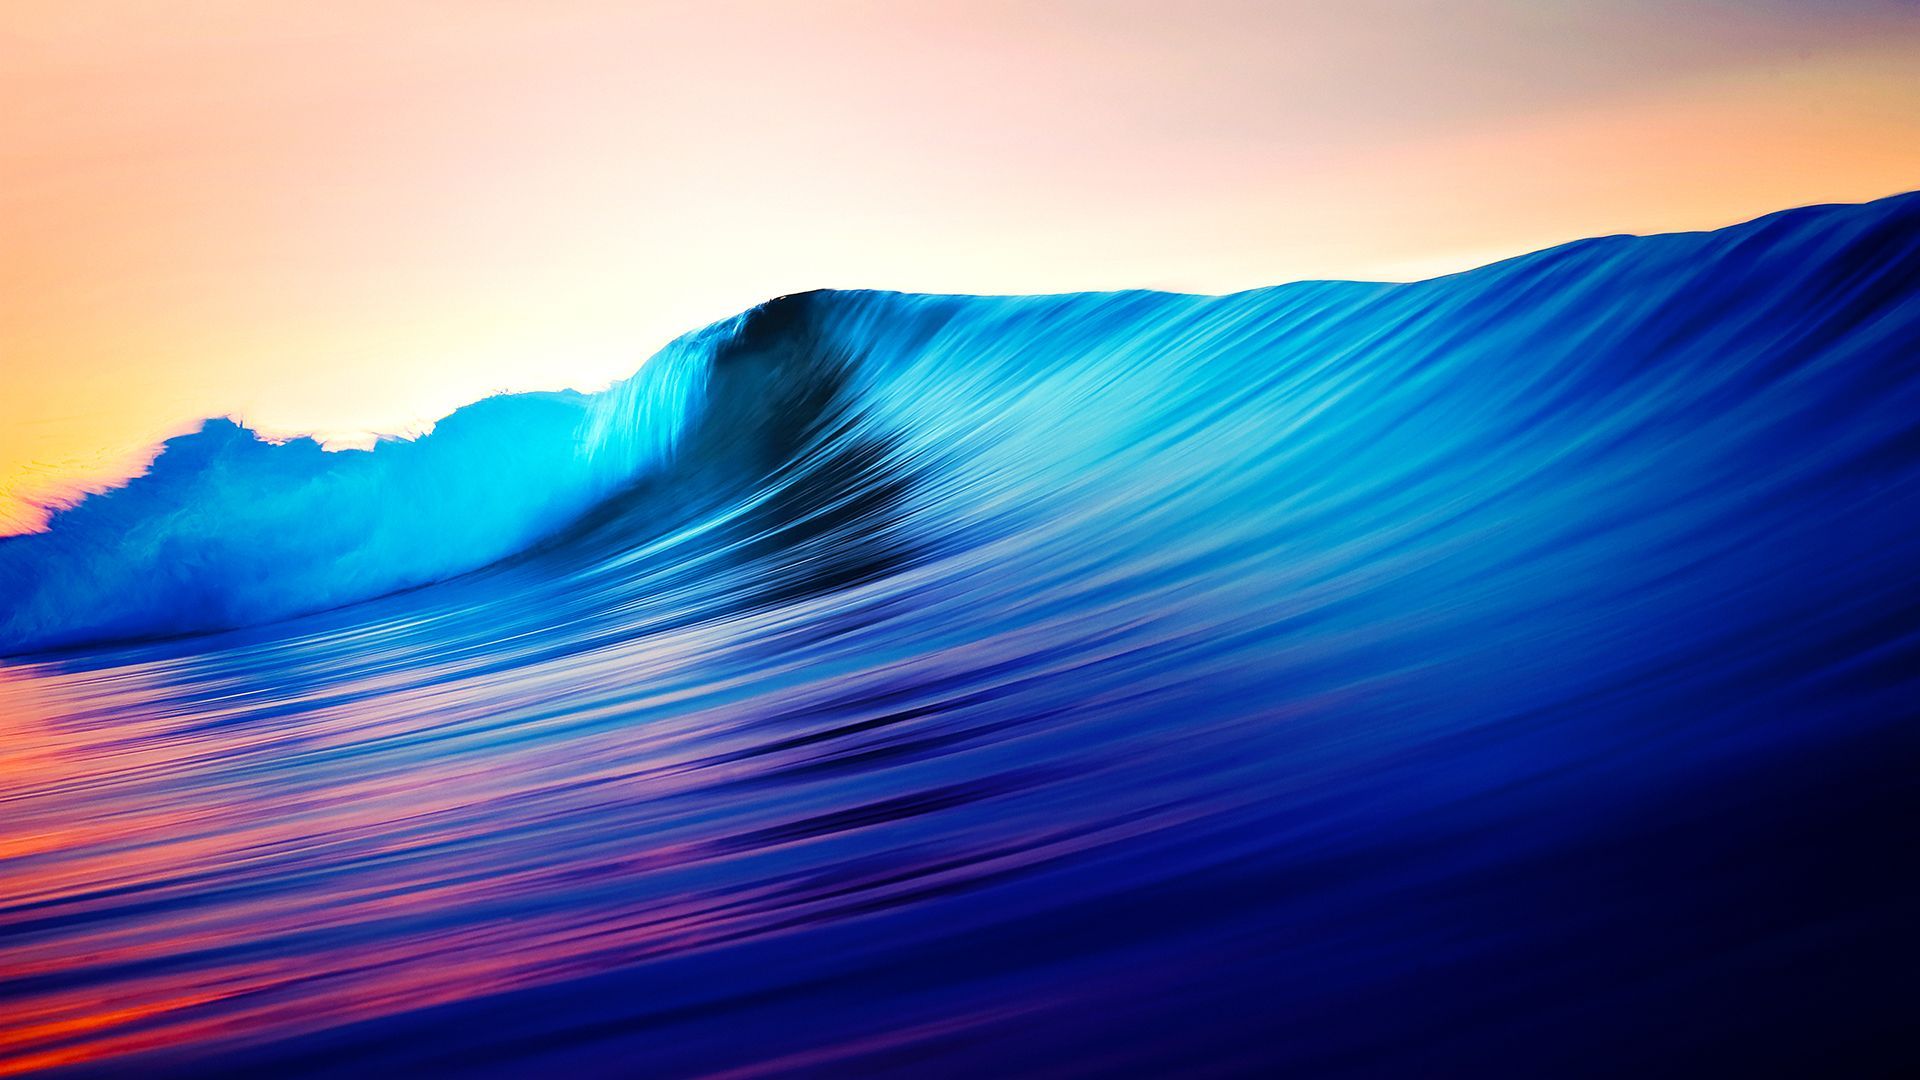 Colorful waves wallpaper   1207396